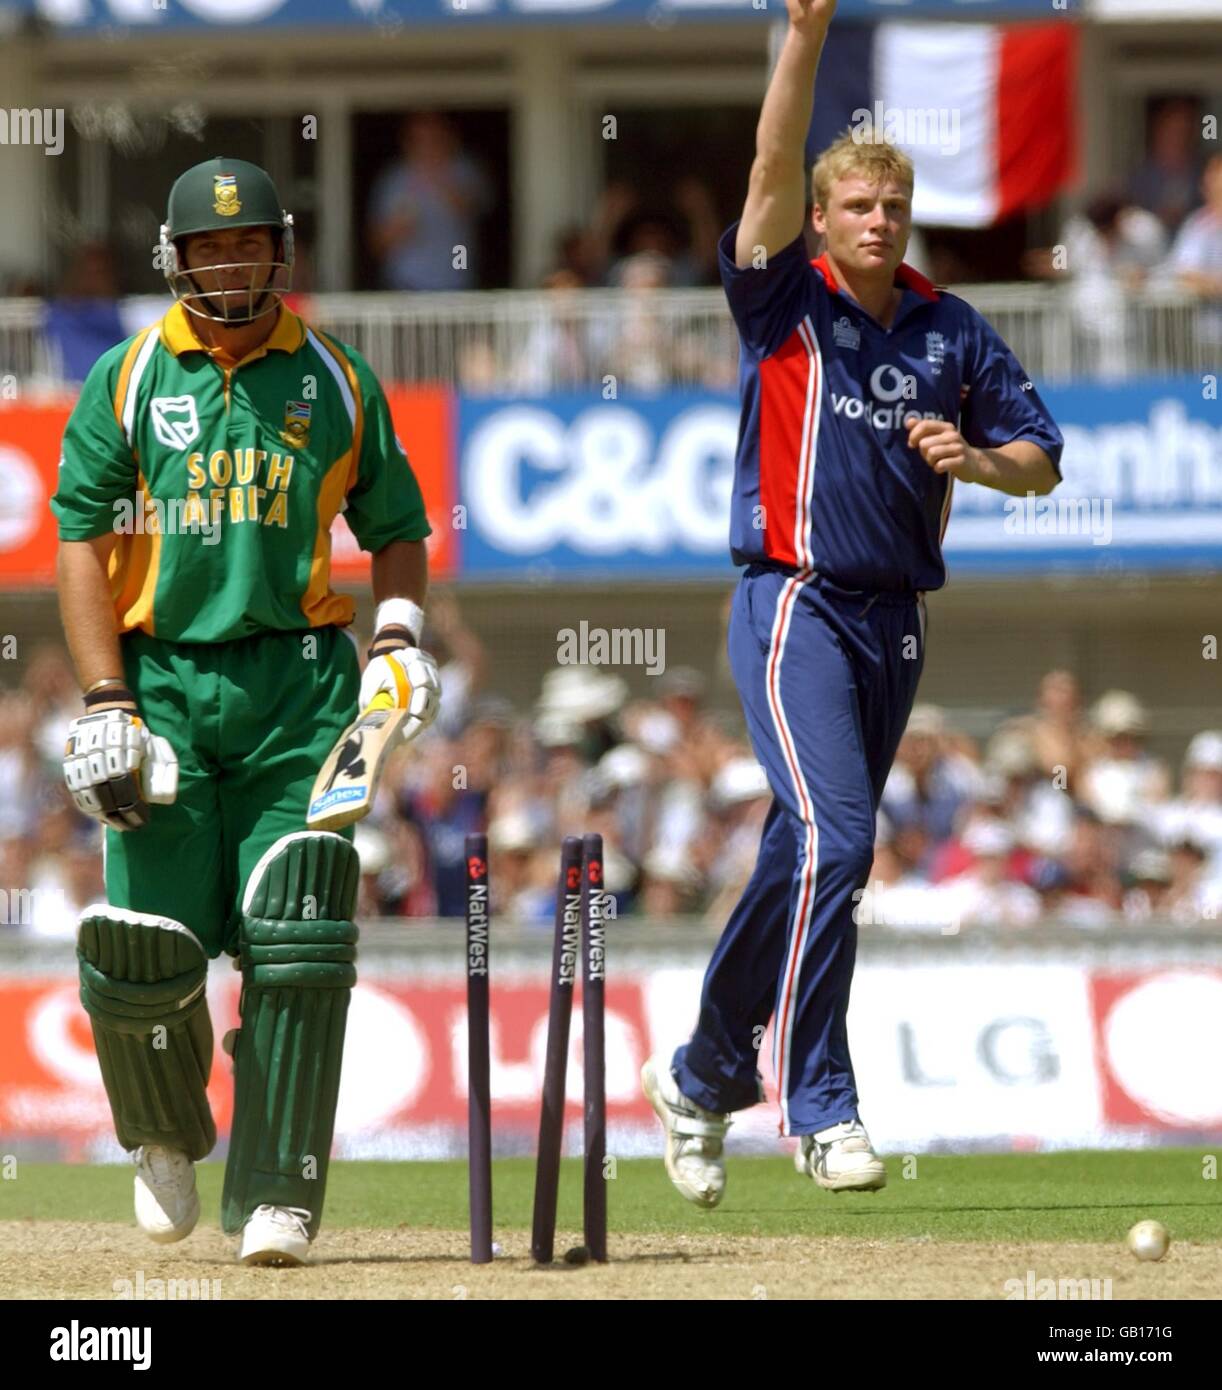 Cricket - England v South Africa - One Day NatWest Series - The Oval. South African batsman Jacques Kallis gets bowled out for 107 runs by Andrew Flintoff Stock Photo